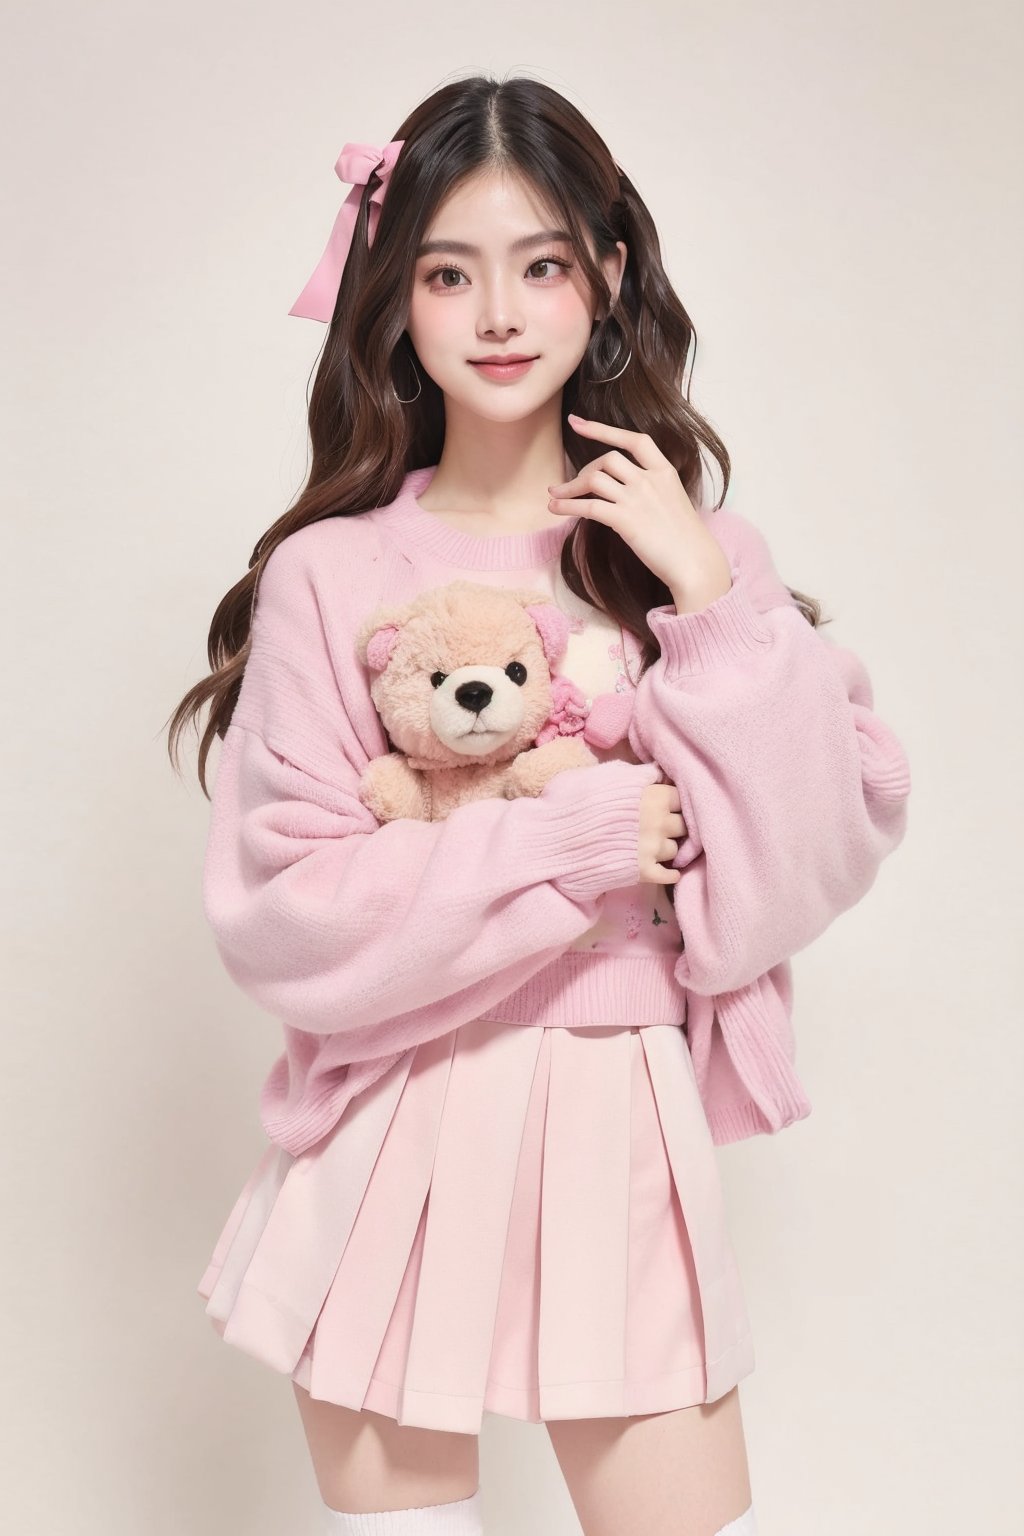 Portrait of baibai, pink oversize sweater, skirt y2k style, teddy bear , adorable pose, smile, color background 